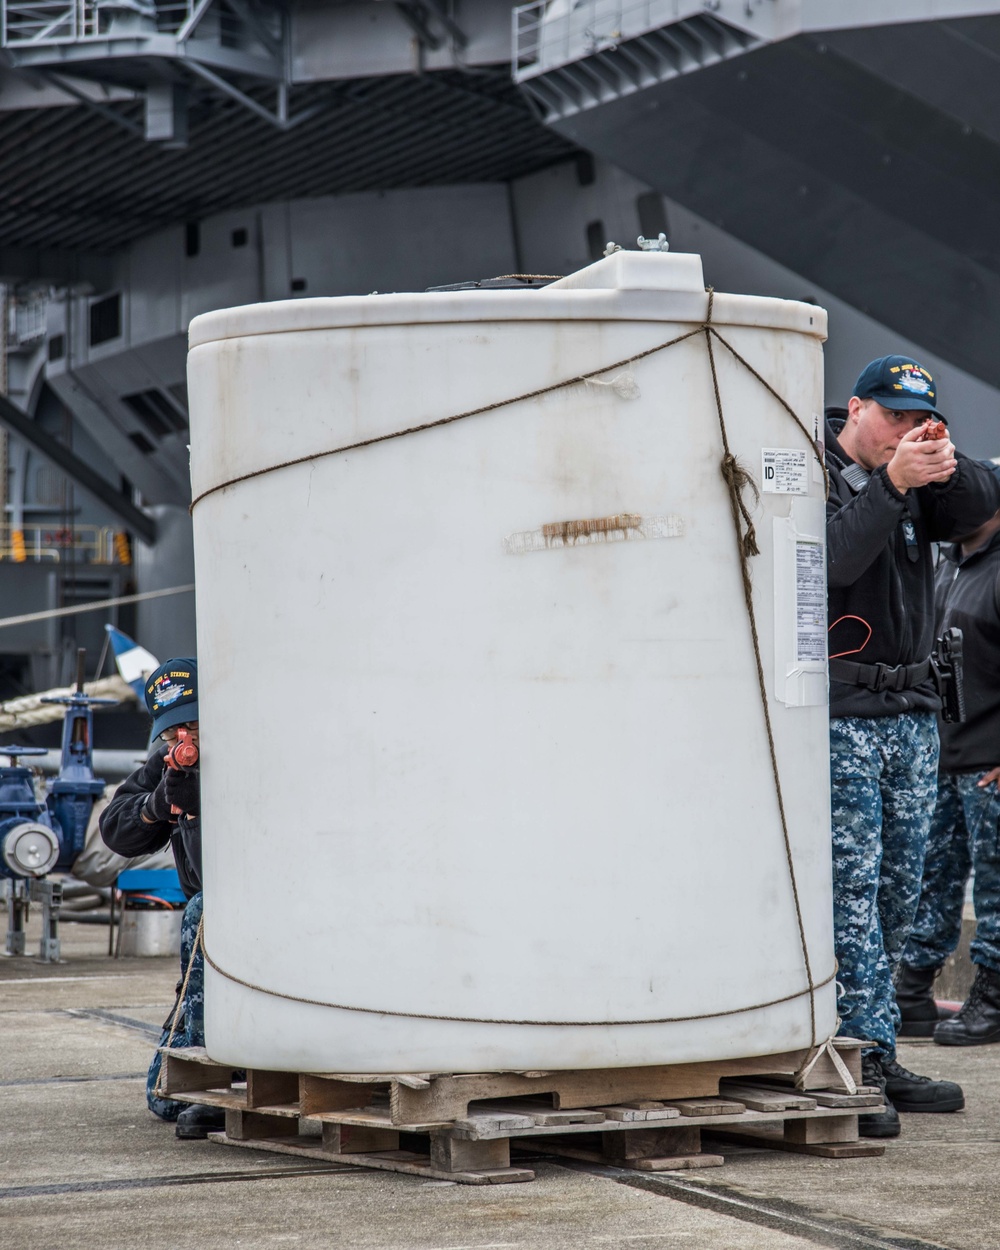 Sailors Participate in an Antiterrorism Force Protection Assessment